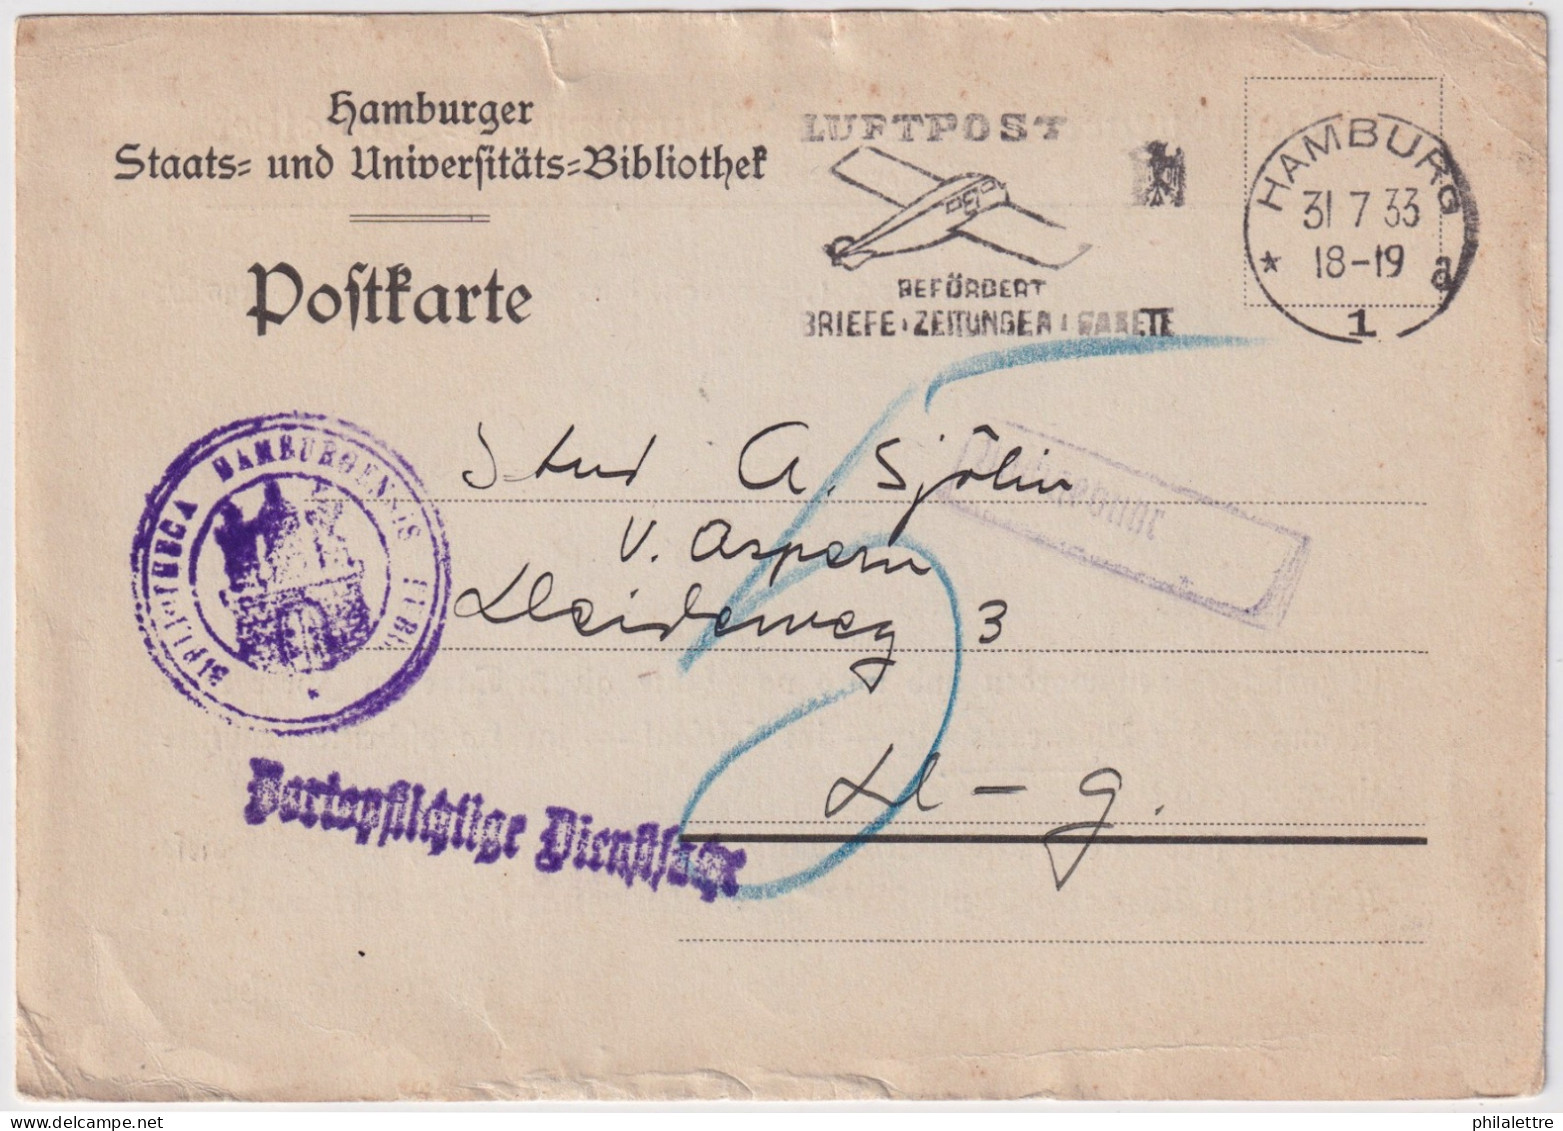 ALLEMAGNE / GERMANY - 1933 Unfranked Card (paid By Recipient - Portopflichtige Dienstsache) Used Locally In Hamburg - Covers & Documents